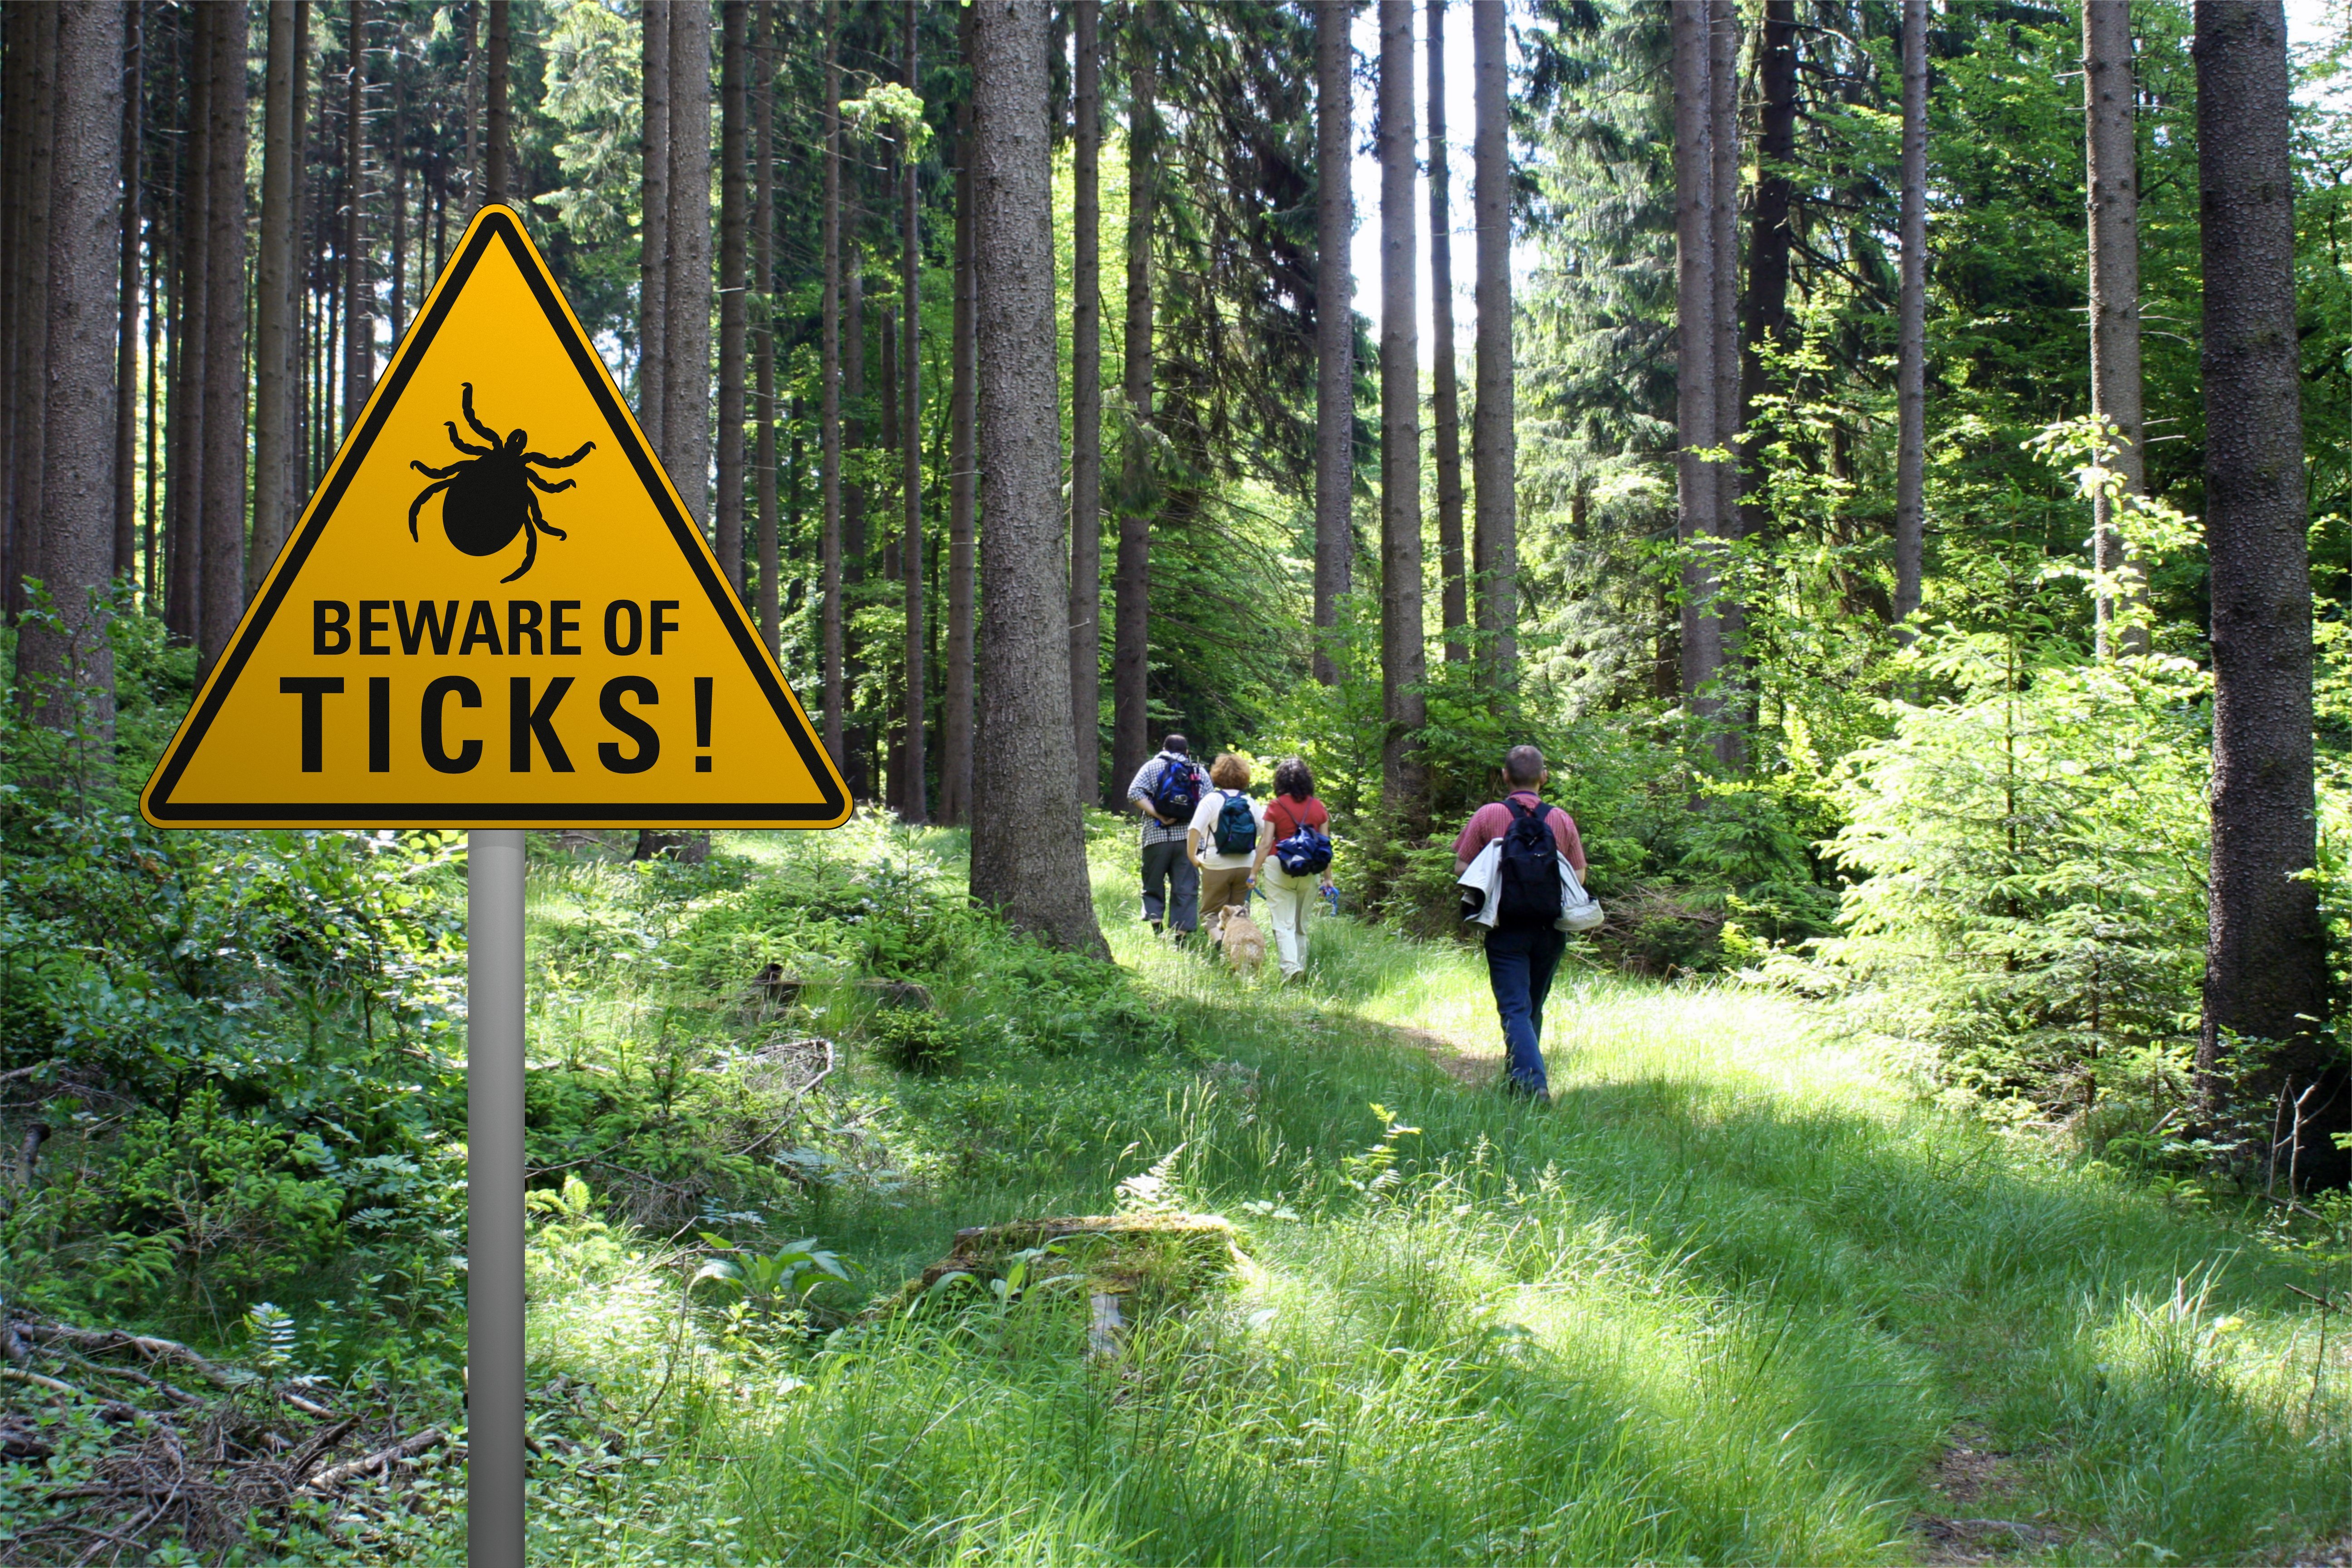 Warning sign "beware of ticks" in infested area in the green forest | Photo: Shutterstock